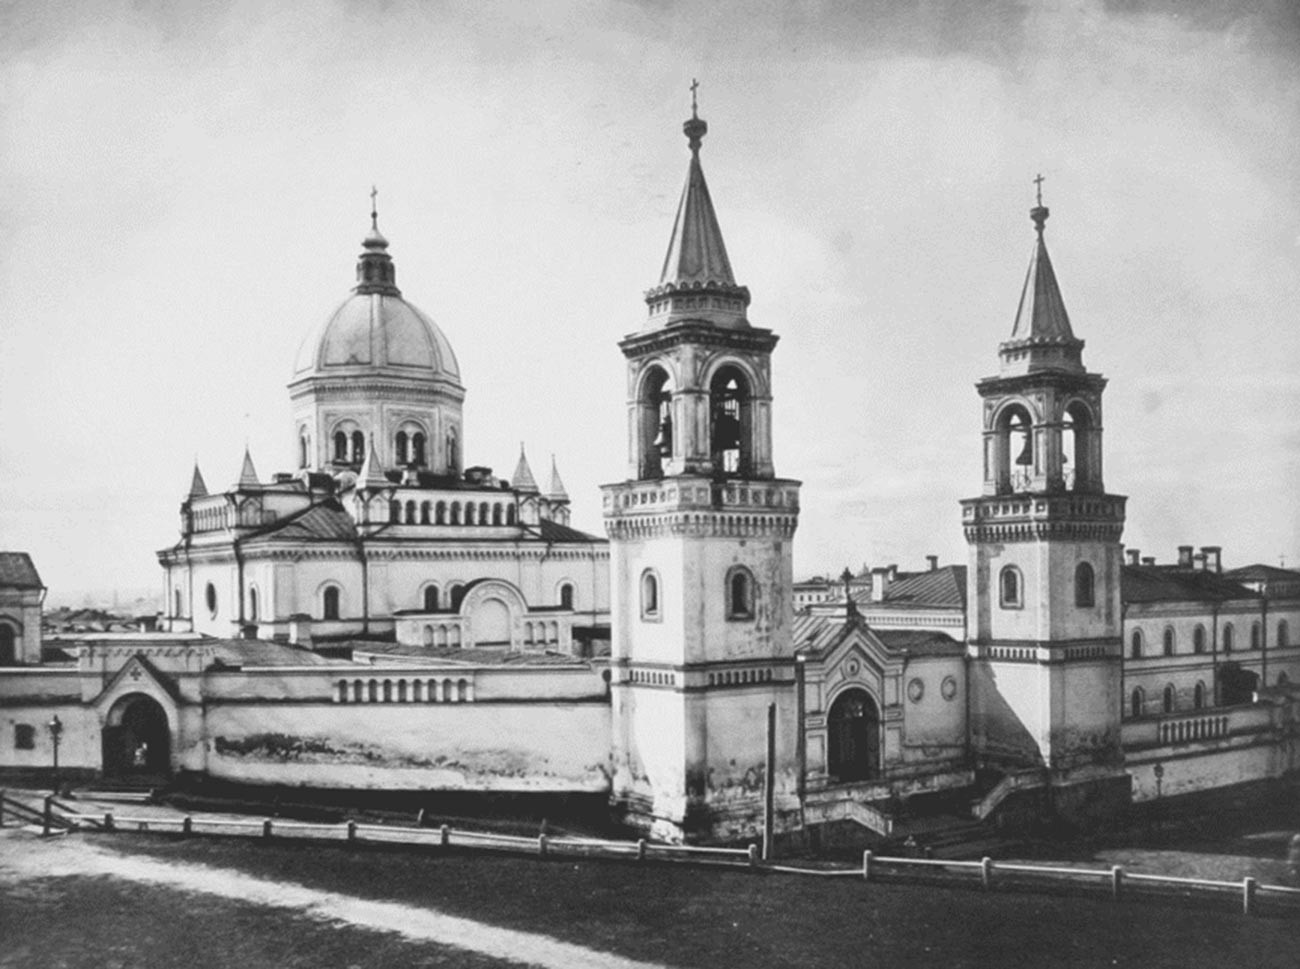 The Ivanovsky monastery, where Sophia's husband was held in a temporary concentration camp in the 1920s.